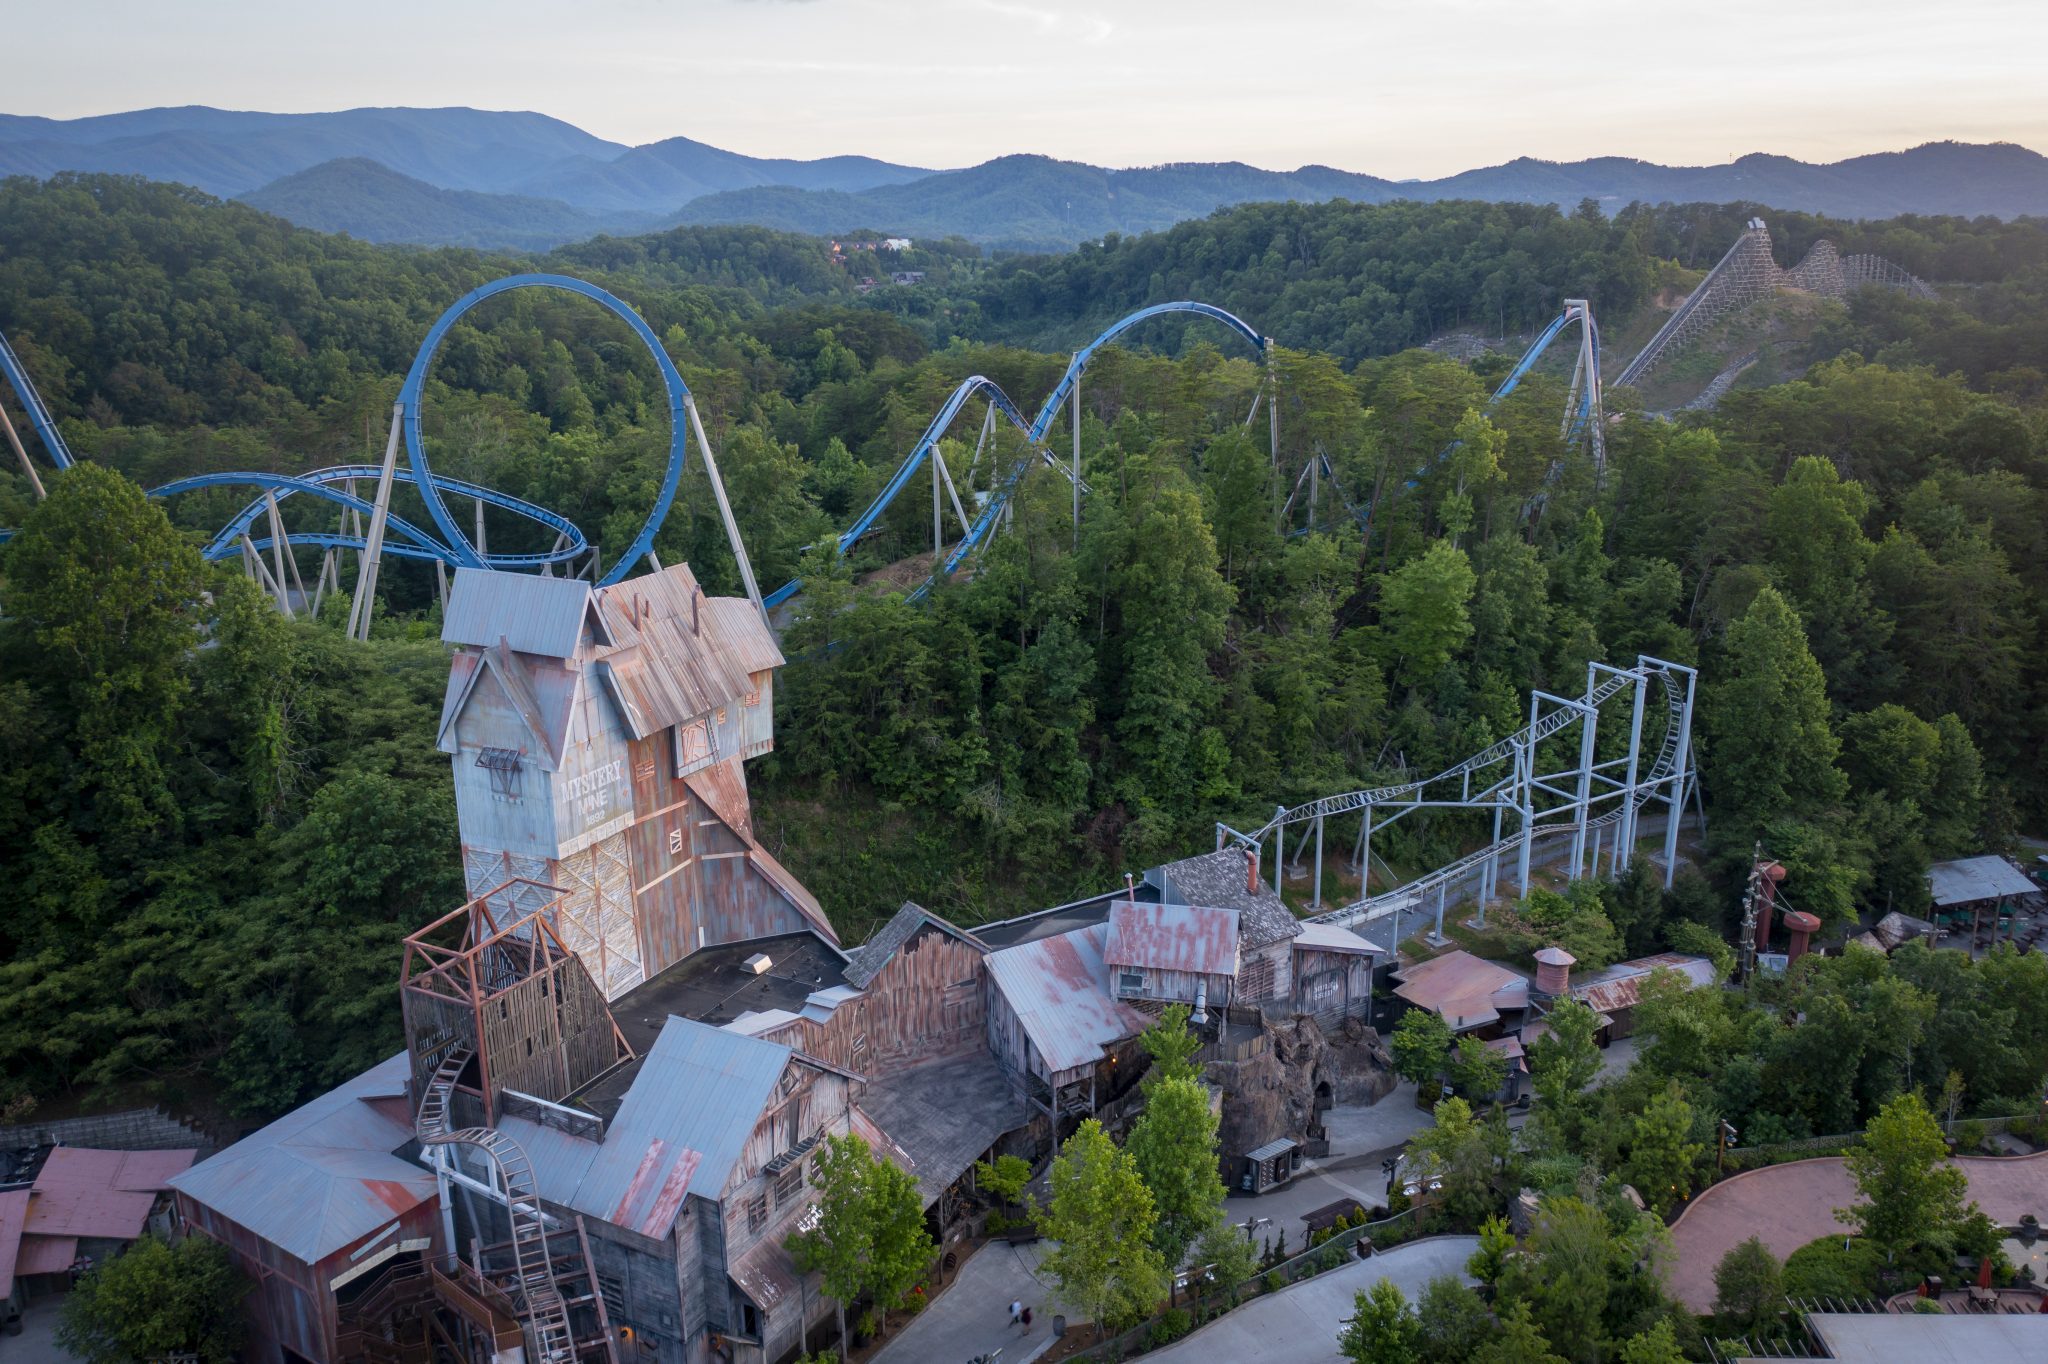 The Best Dollywood Season Pass + A GIVEAWAY FOR 4 GOLD SEASON PASSES